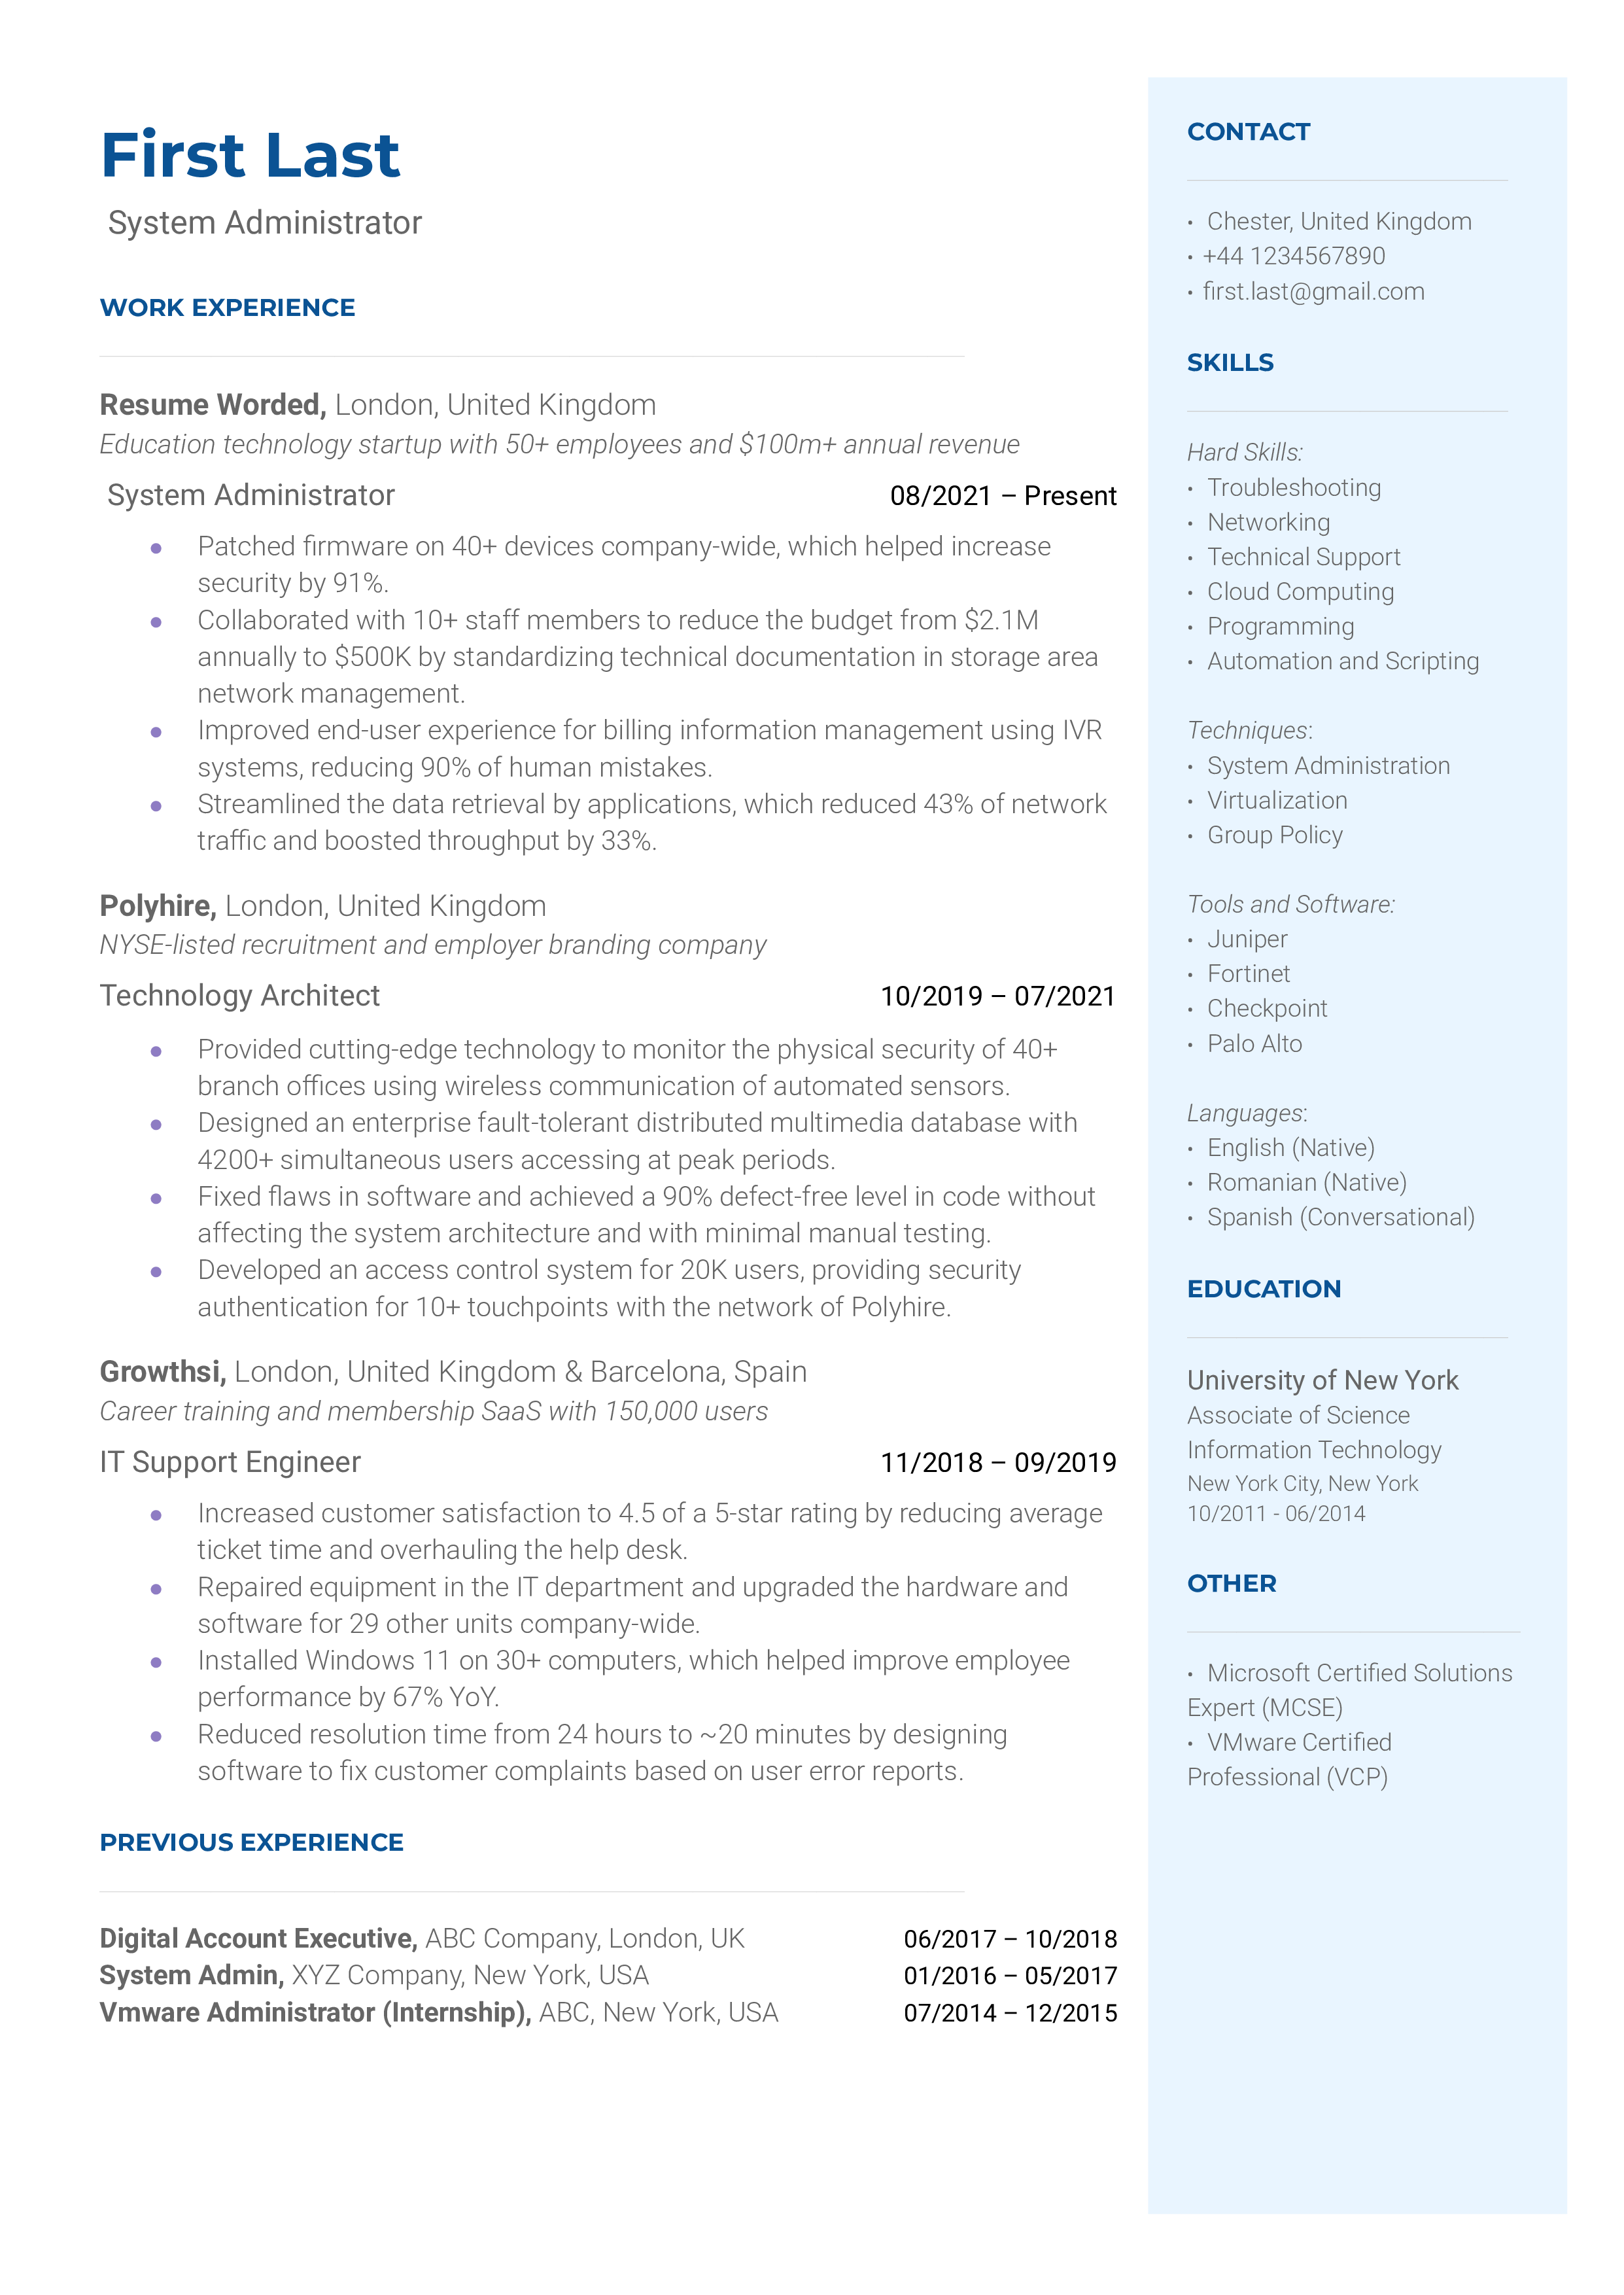 A System Administrator resume emphasizing experience in managing and maintaining computer systems, troubleshooting technical issues, and ensuring network security.